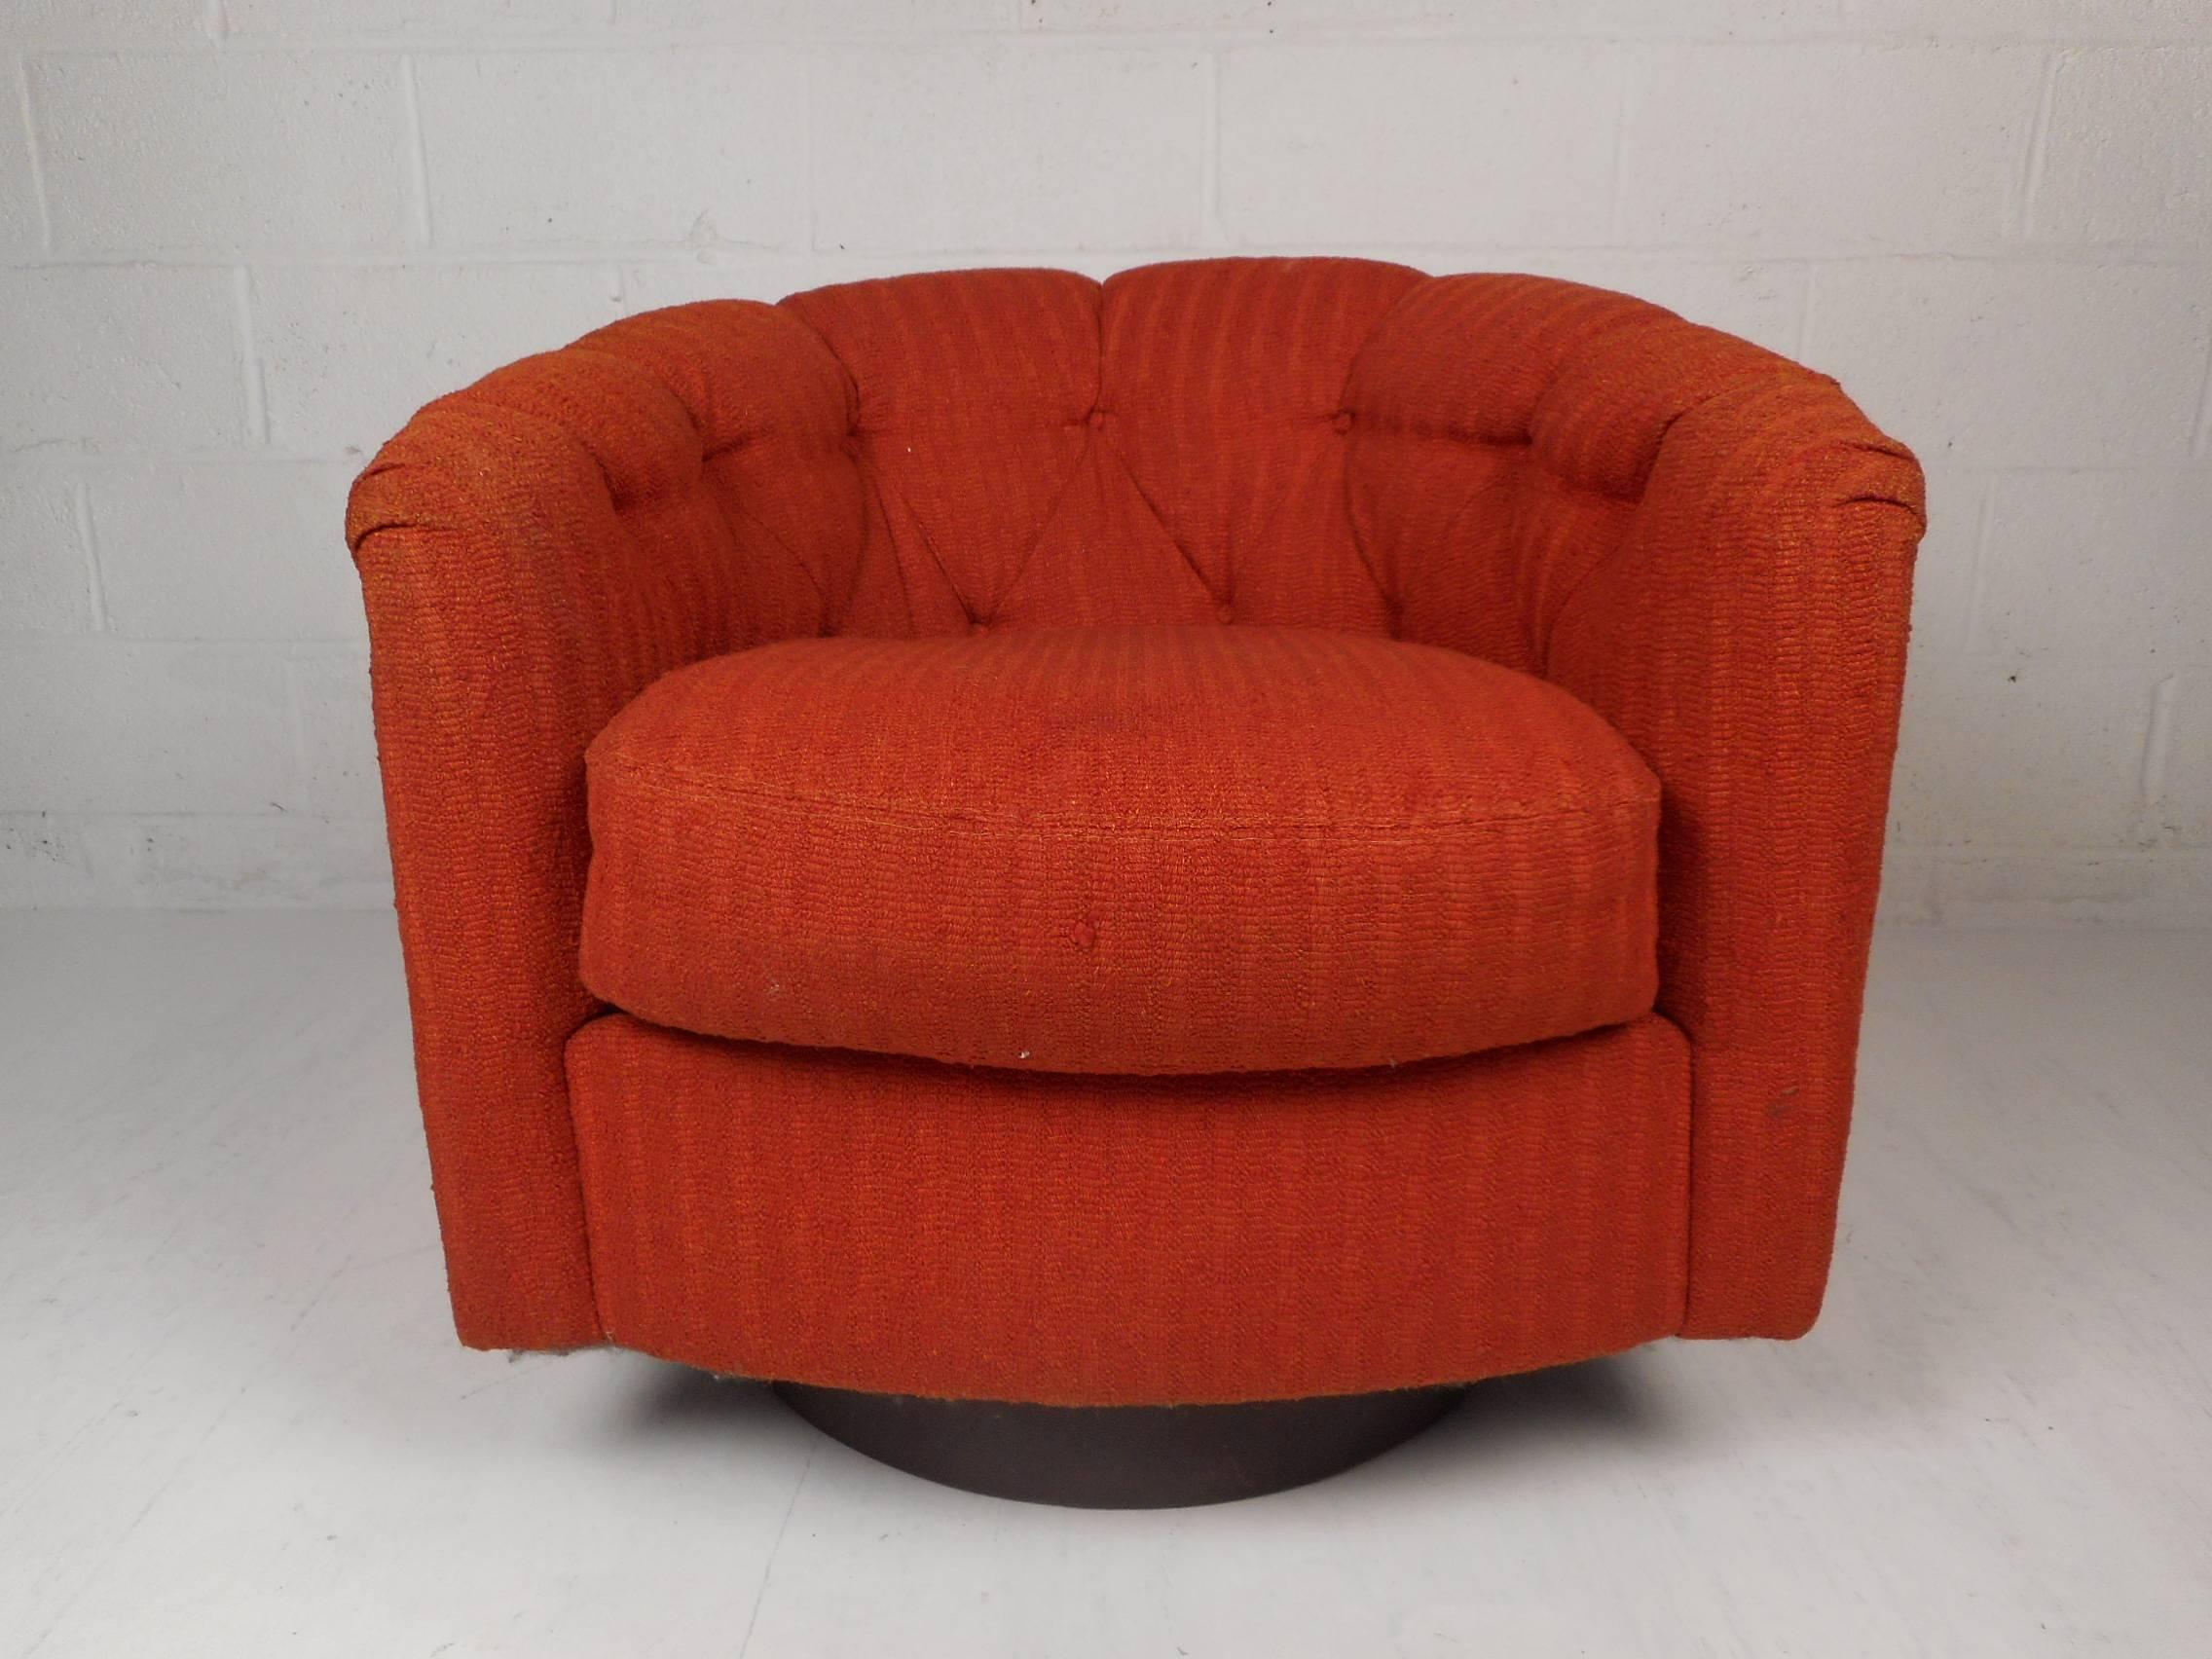 This beautiful vintage modern lounge chair has the ability to swivel and tilt with its versatile round walnut base. This wonderful chair is covered in plush orange upholstery and has an overstuffed removable cushion. Sleek design with a tufted